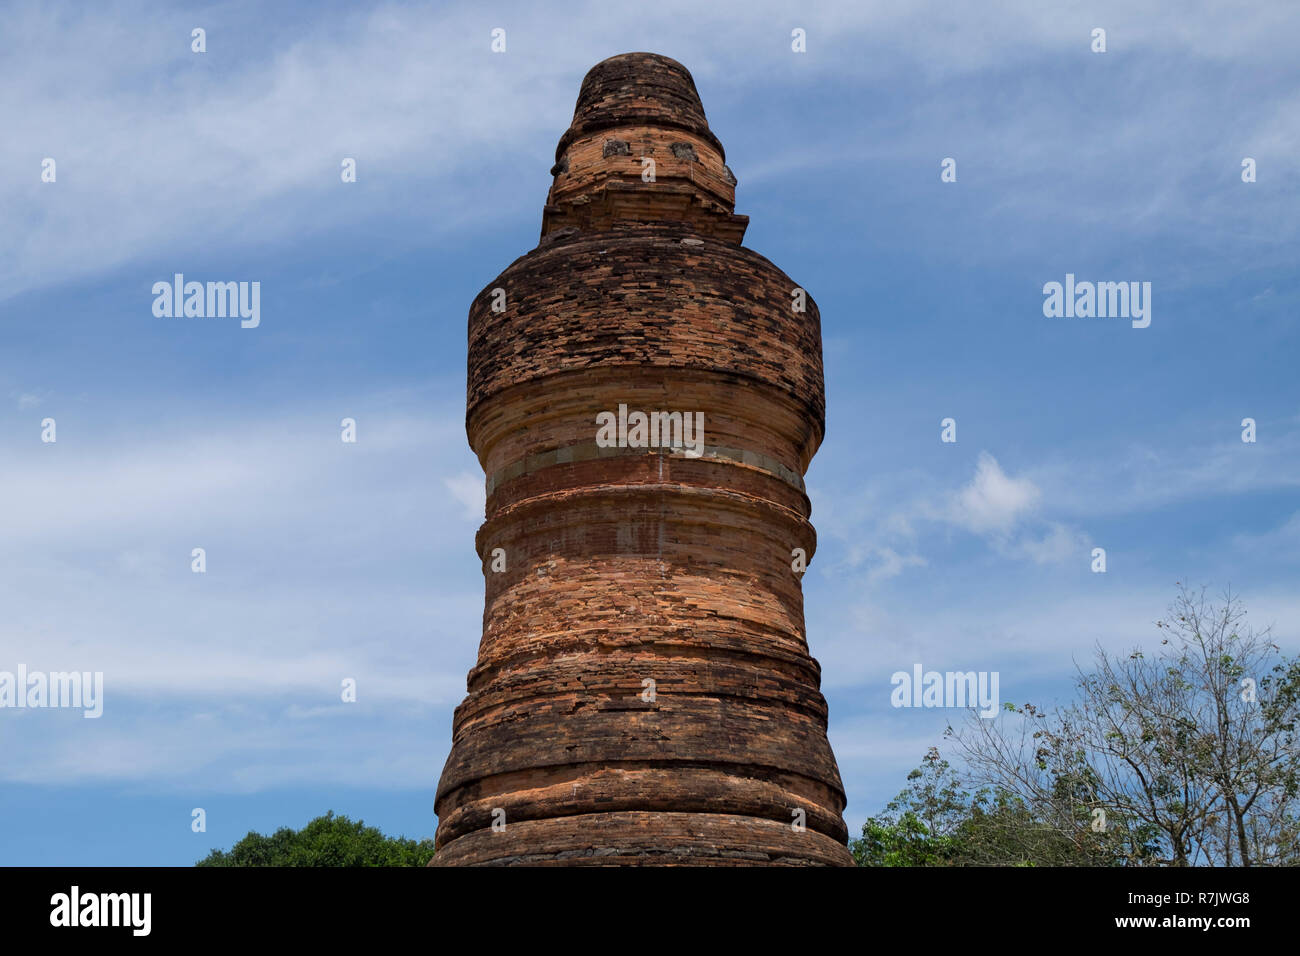 At the temple ruins of Muara Takus near Pekanbaru, Indonesia. The complex is a set of old Buddhist temples. A beautiful minaret. Stock Photo